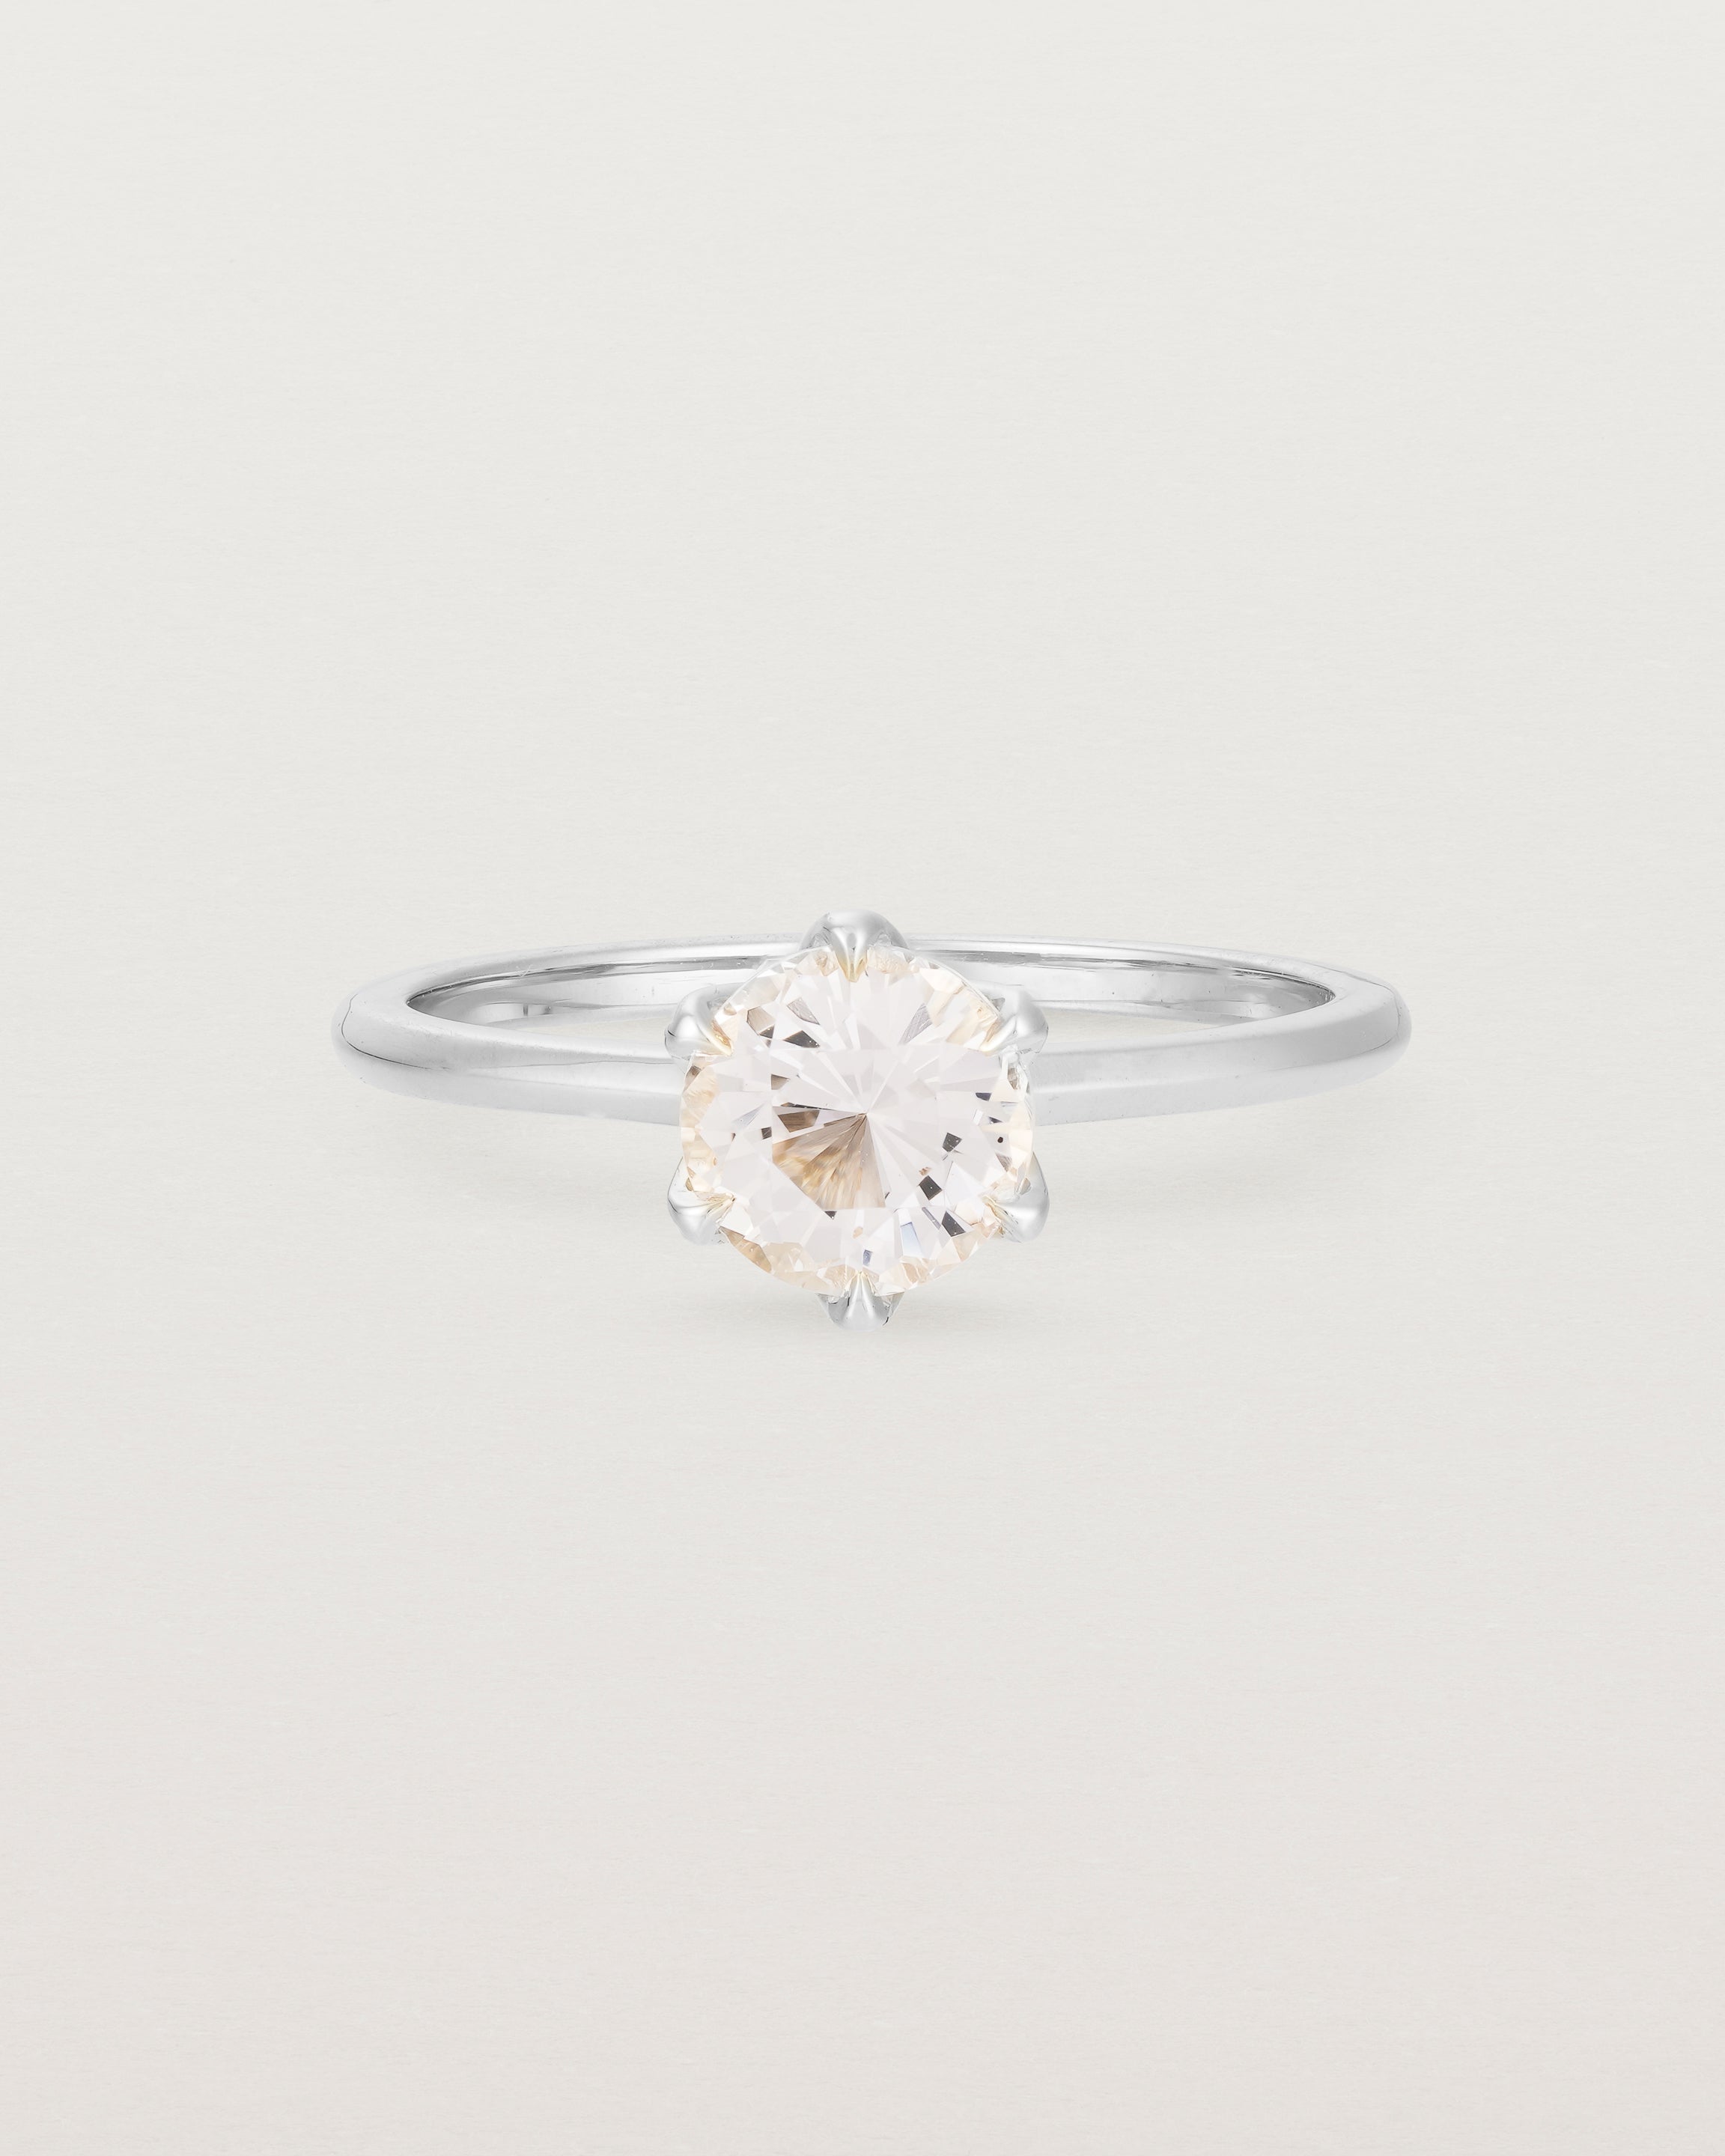 Front view of the Mandala Solitaire Ring | Morganite & Diamonds | White Gold.